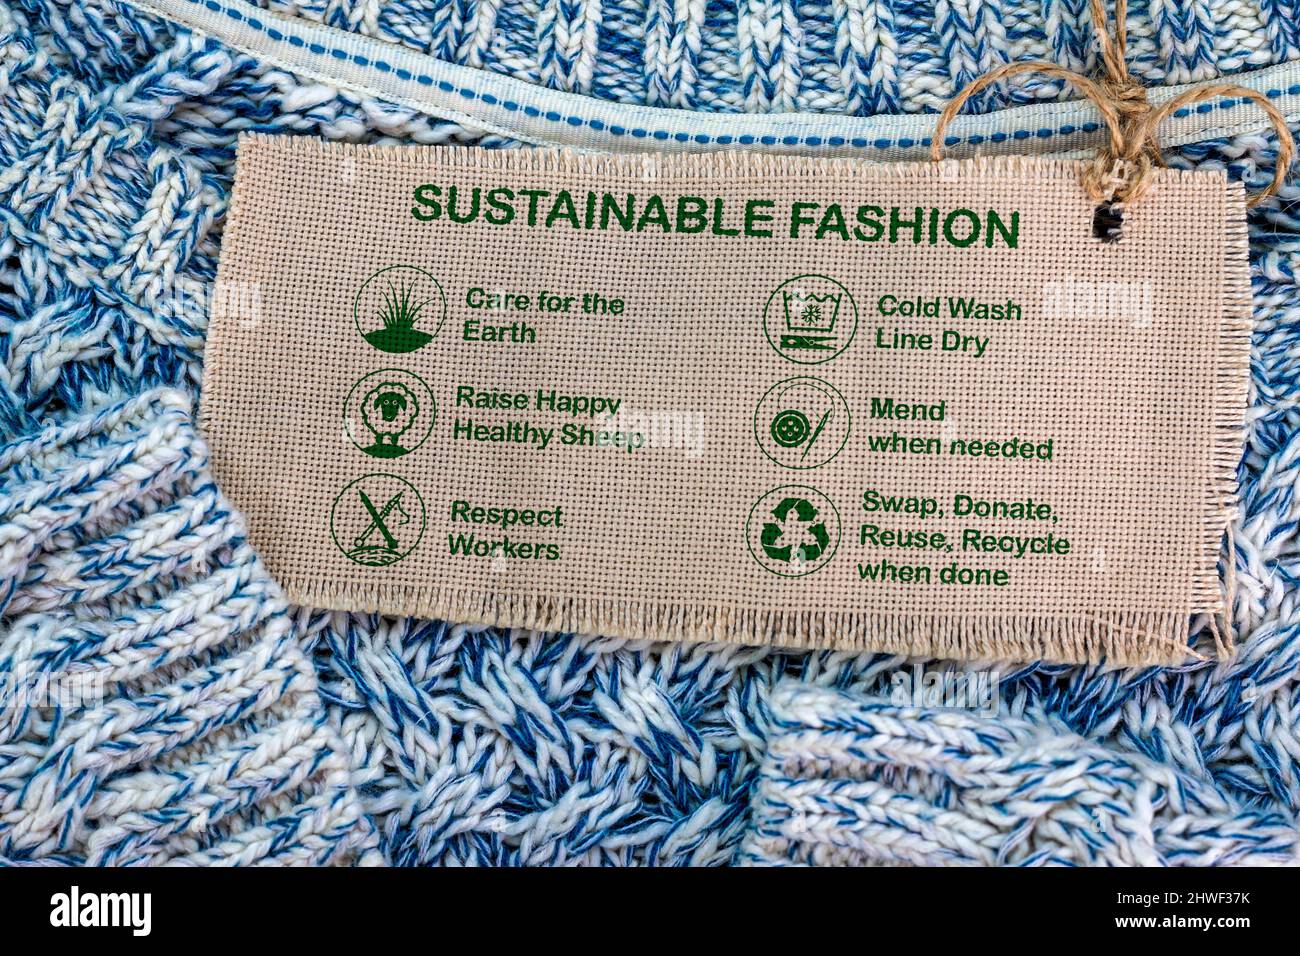 sustainable fashion label on woollen jumper with care icons and text, ethical consumerism Stock Photo